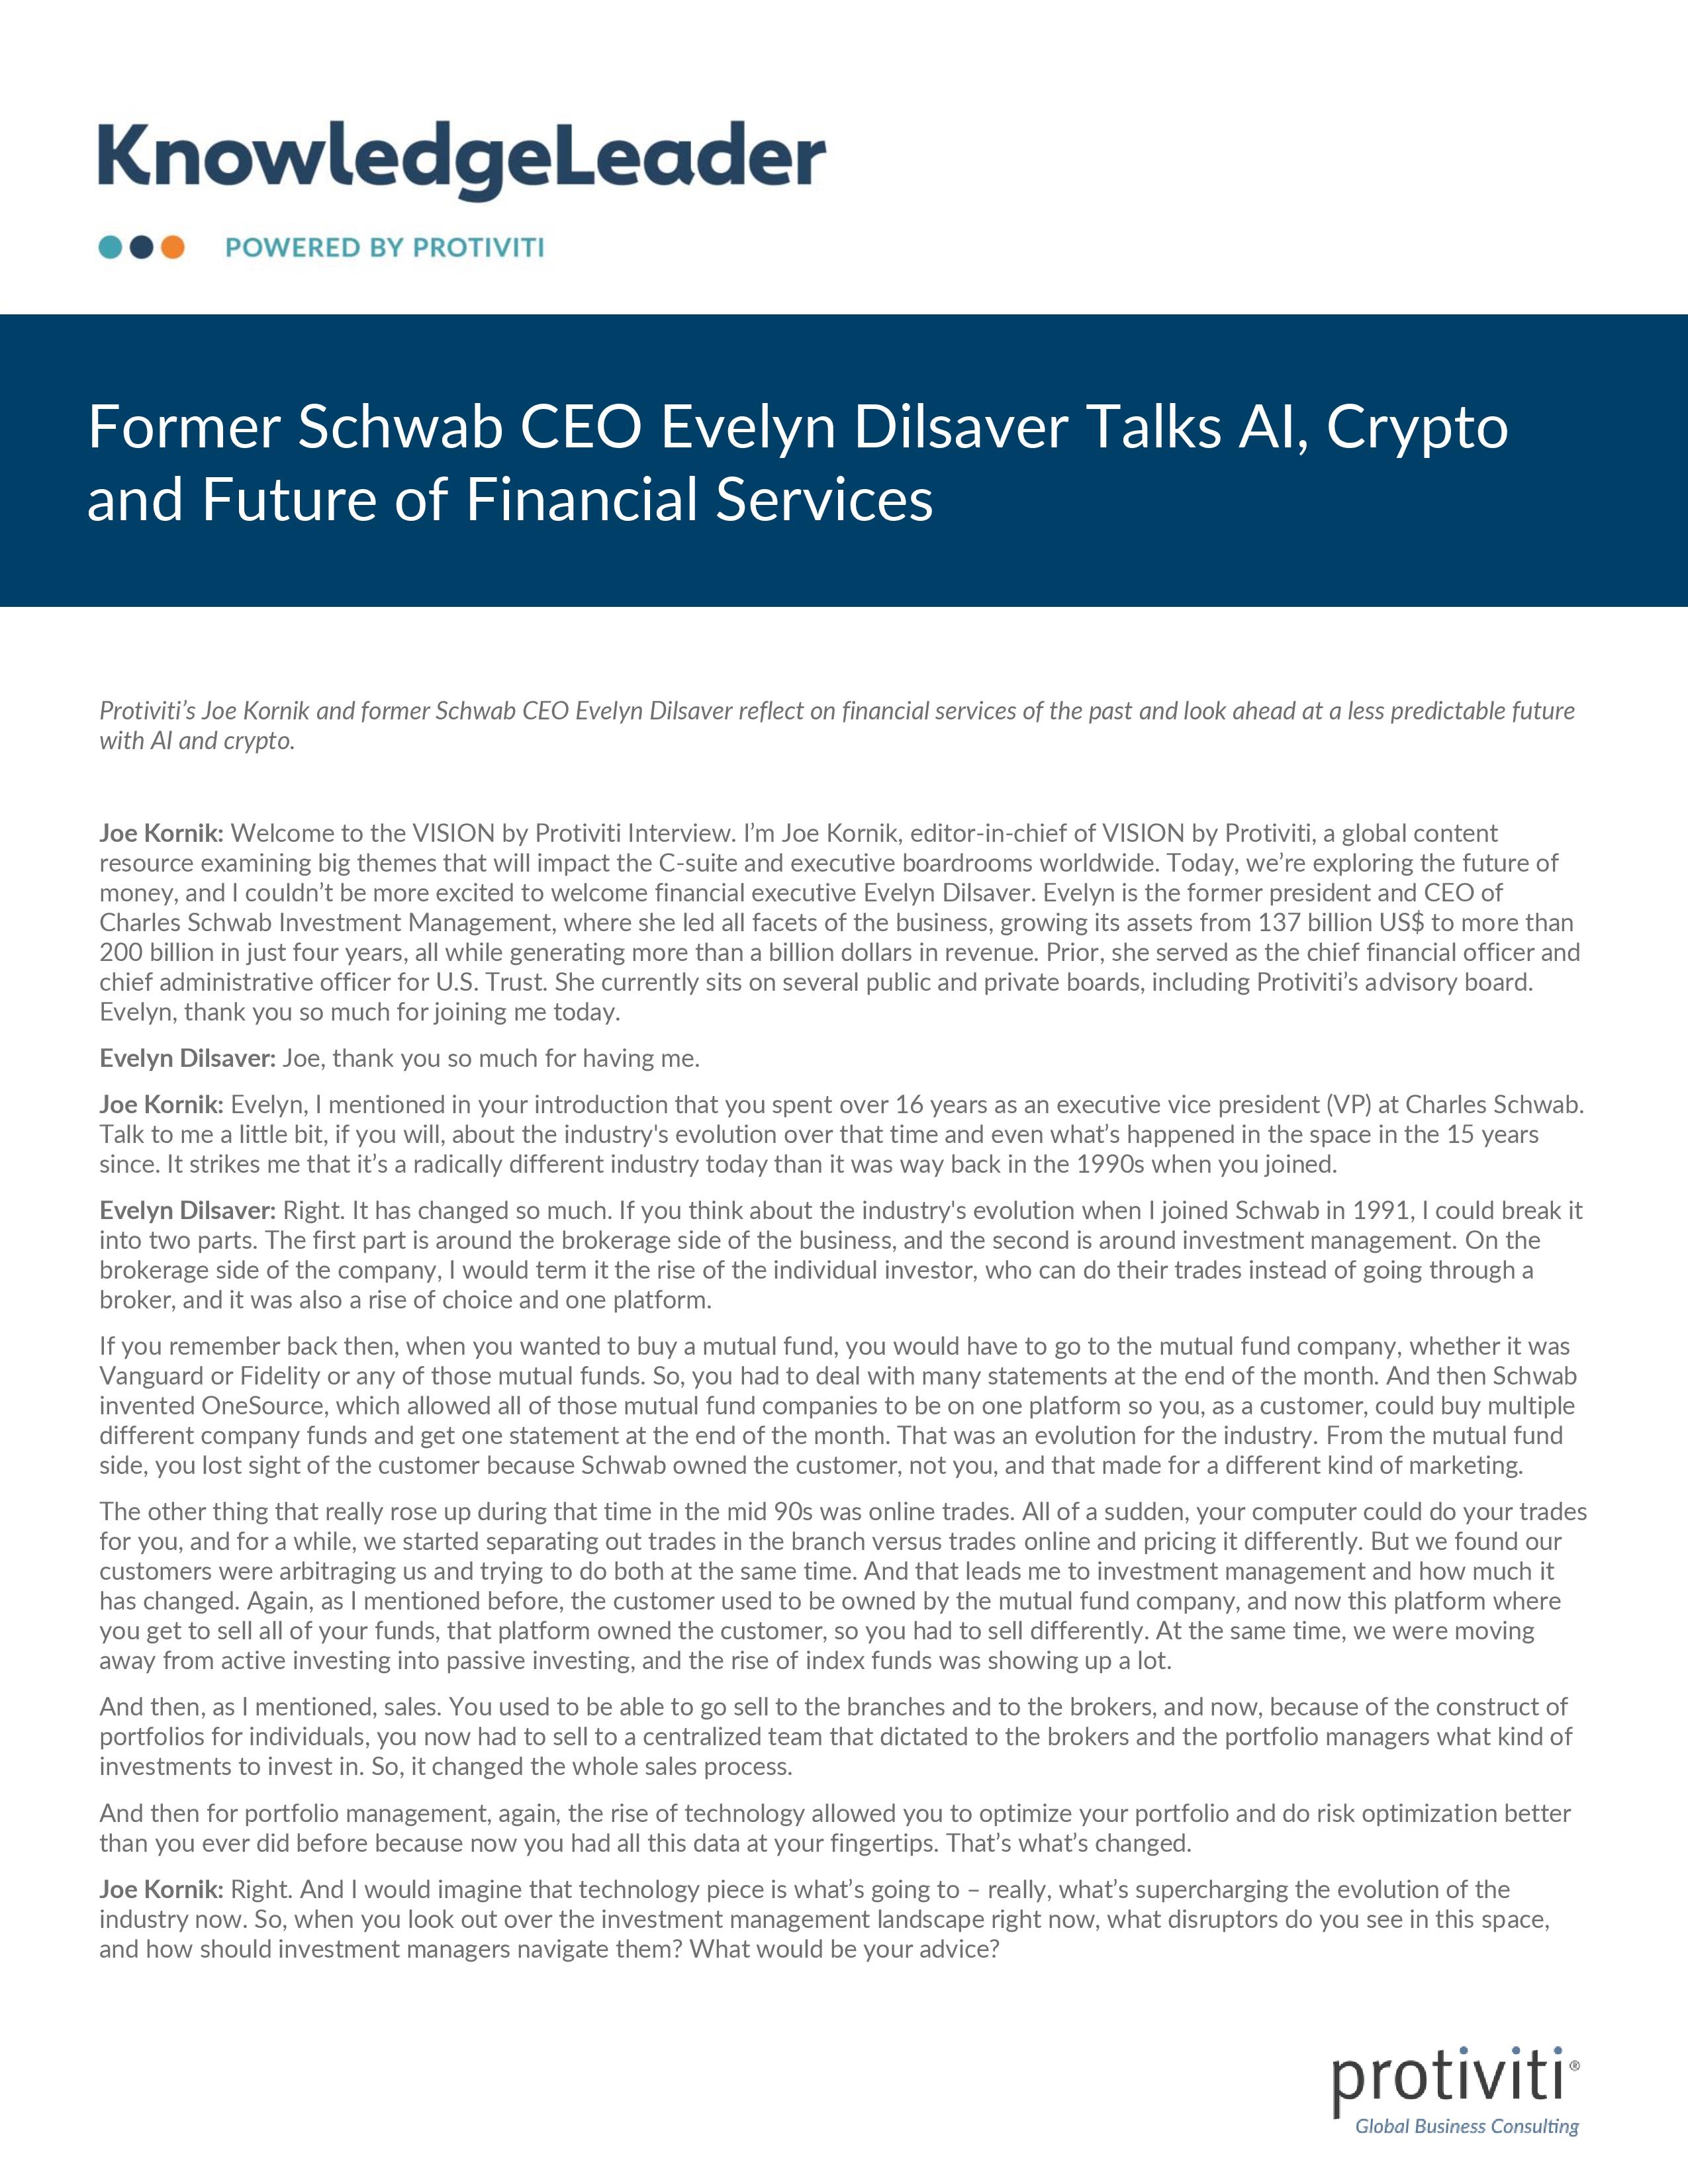 Screenshot of the first page of Former Schwab CEO Evelyn Dilsaver Talks AI, Crypto and Future of Financial Services